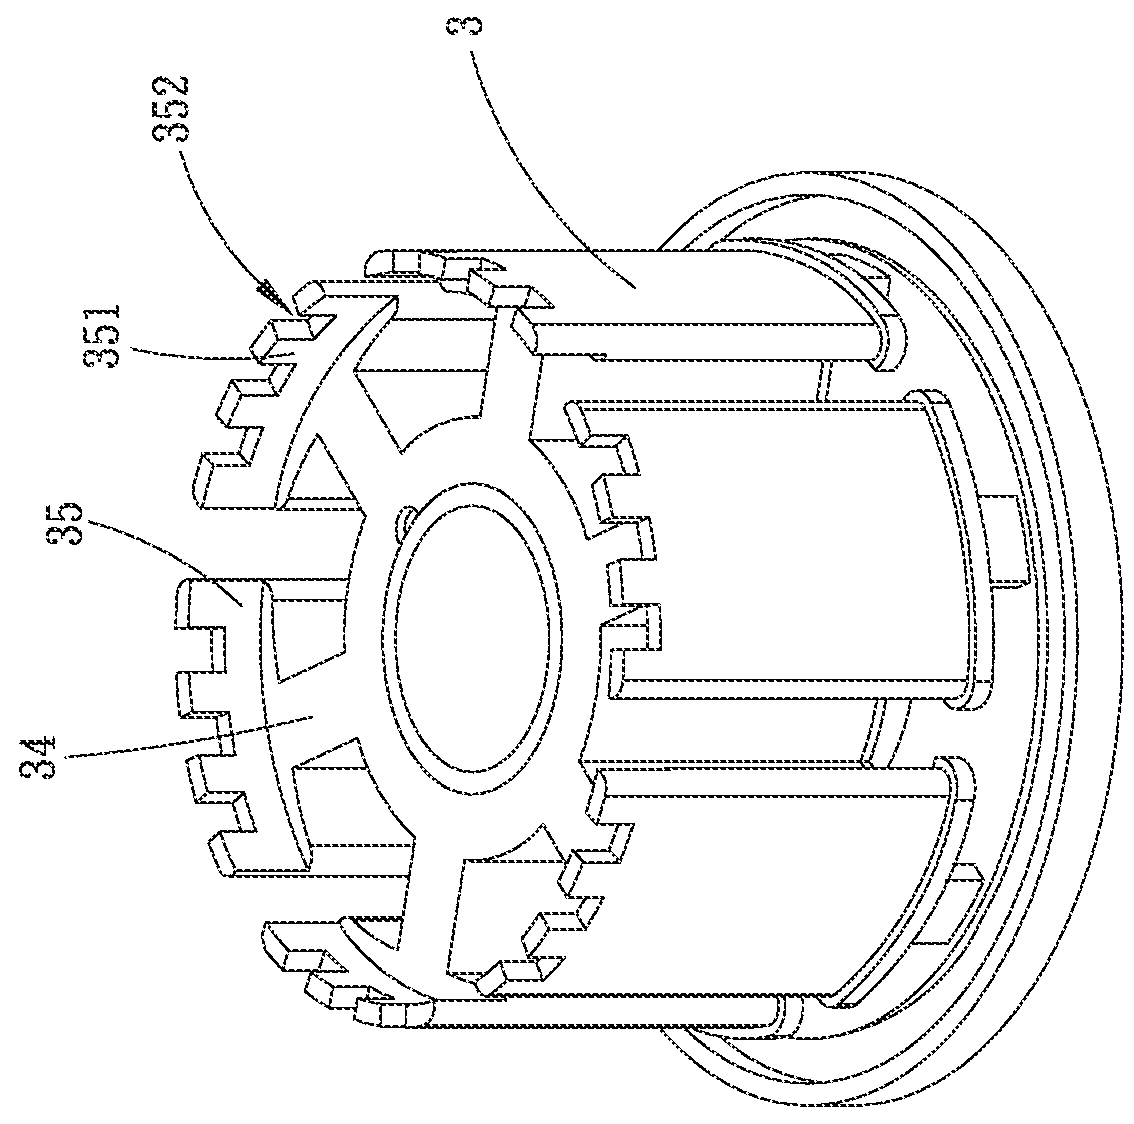 Stator structure